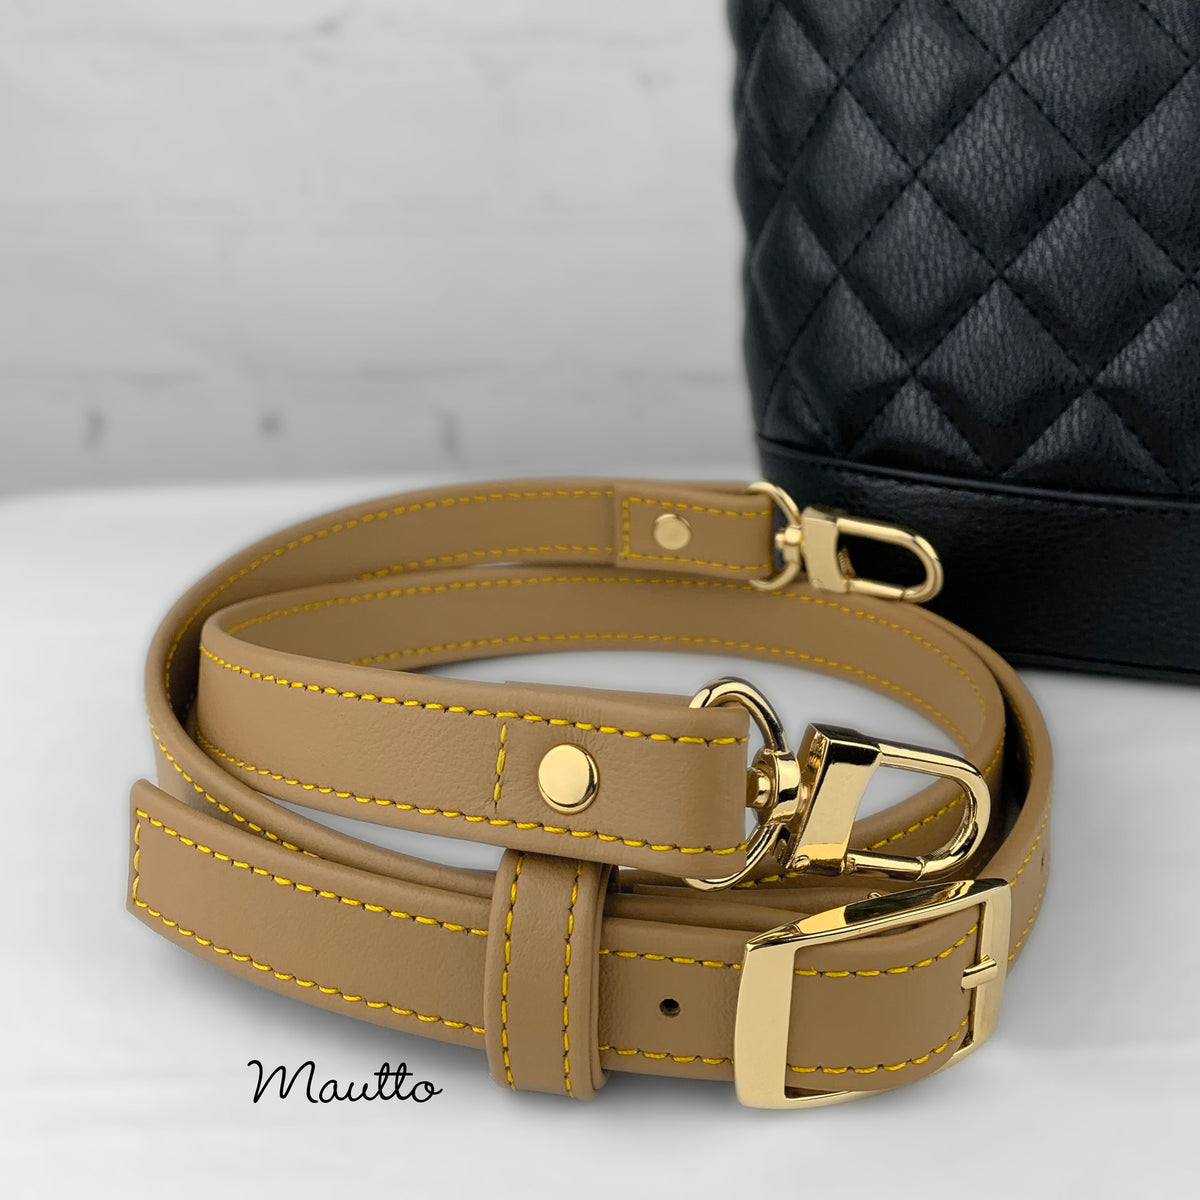 Mautto Adjustable Buckle Strap - Tan Leathers w/ Yellow Stitching - 19mm Wide Light Tan Leather / Silver-Tone